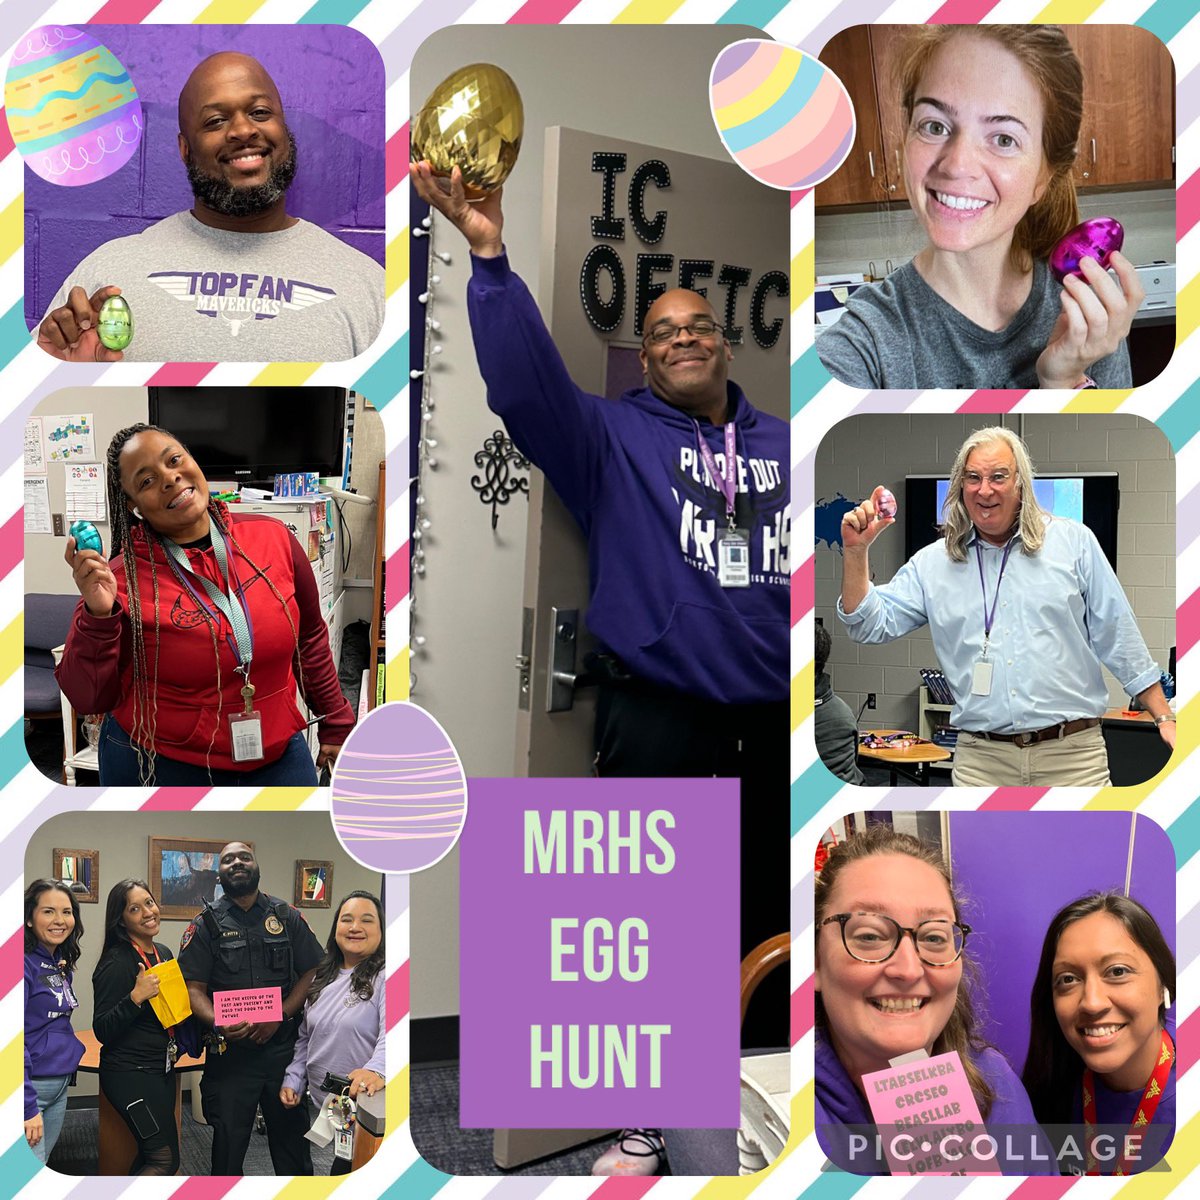 MRHS staff 🐇HOPPED TO IT 🐇 to find clues and hidden candy during our 2nd Annual Egg Hunt . Always hilarious. Always competitive. 💜🤘🏻Thank you to everyone that participated! @MRHSMavericks @ebmorris89 @mchernandez10 @CLReid20 #ilovemortonranch #mavsrock